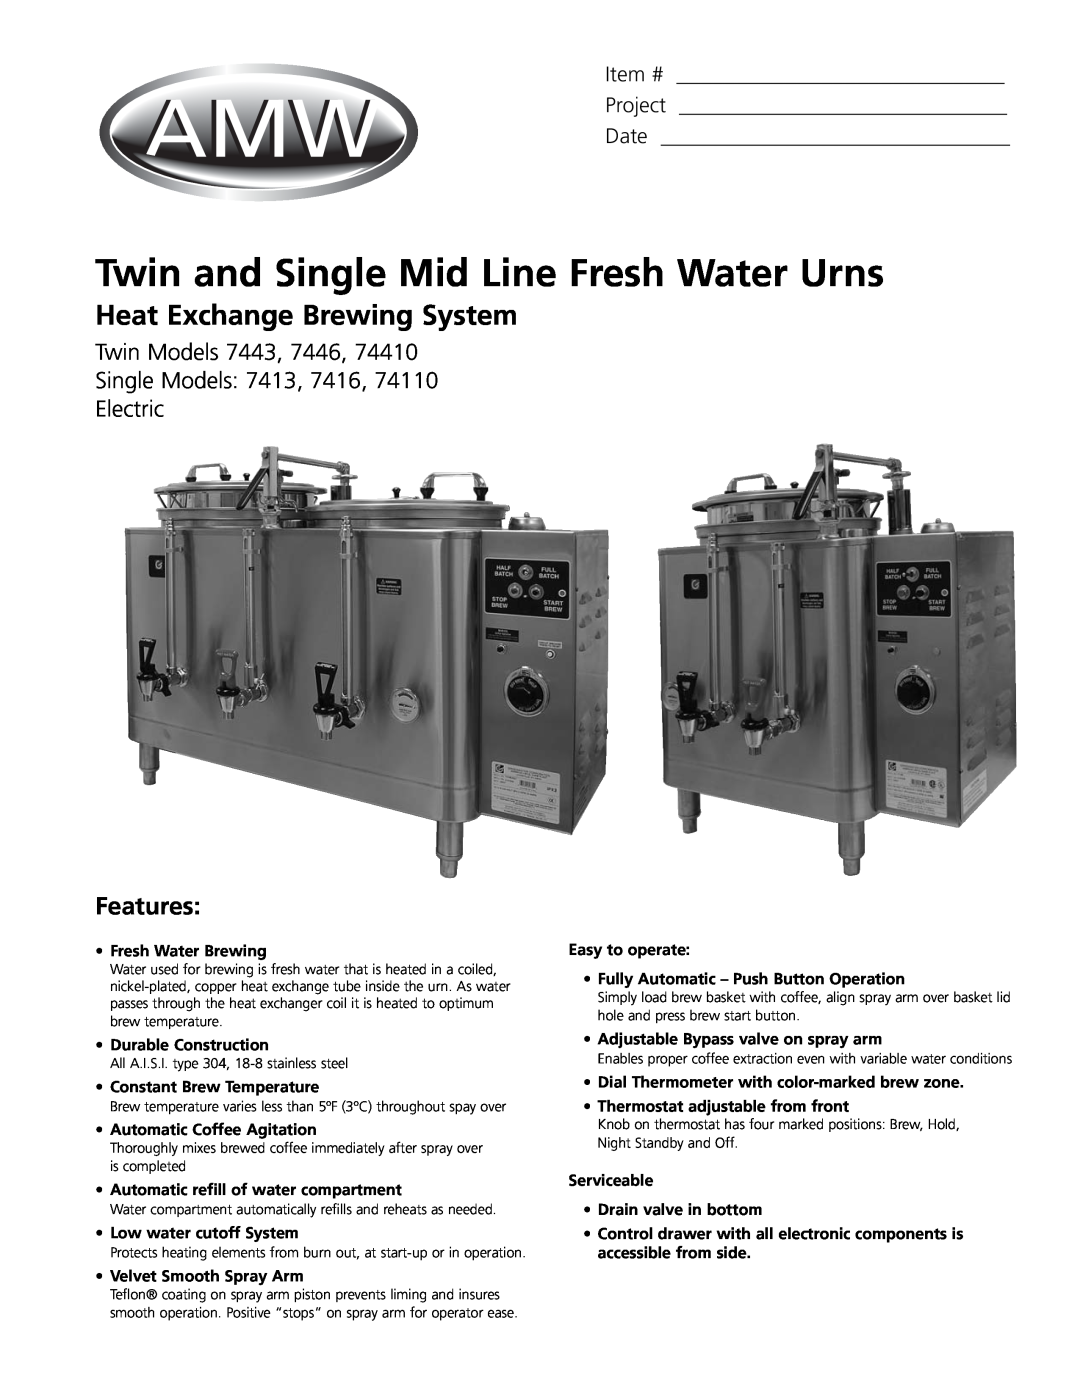 Grindmaster 74110 manual Twin and Single Mid Line Fresh Water Urns, Heat Exchange Brewing System, Features, Twin Models 